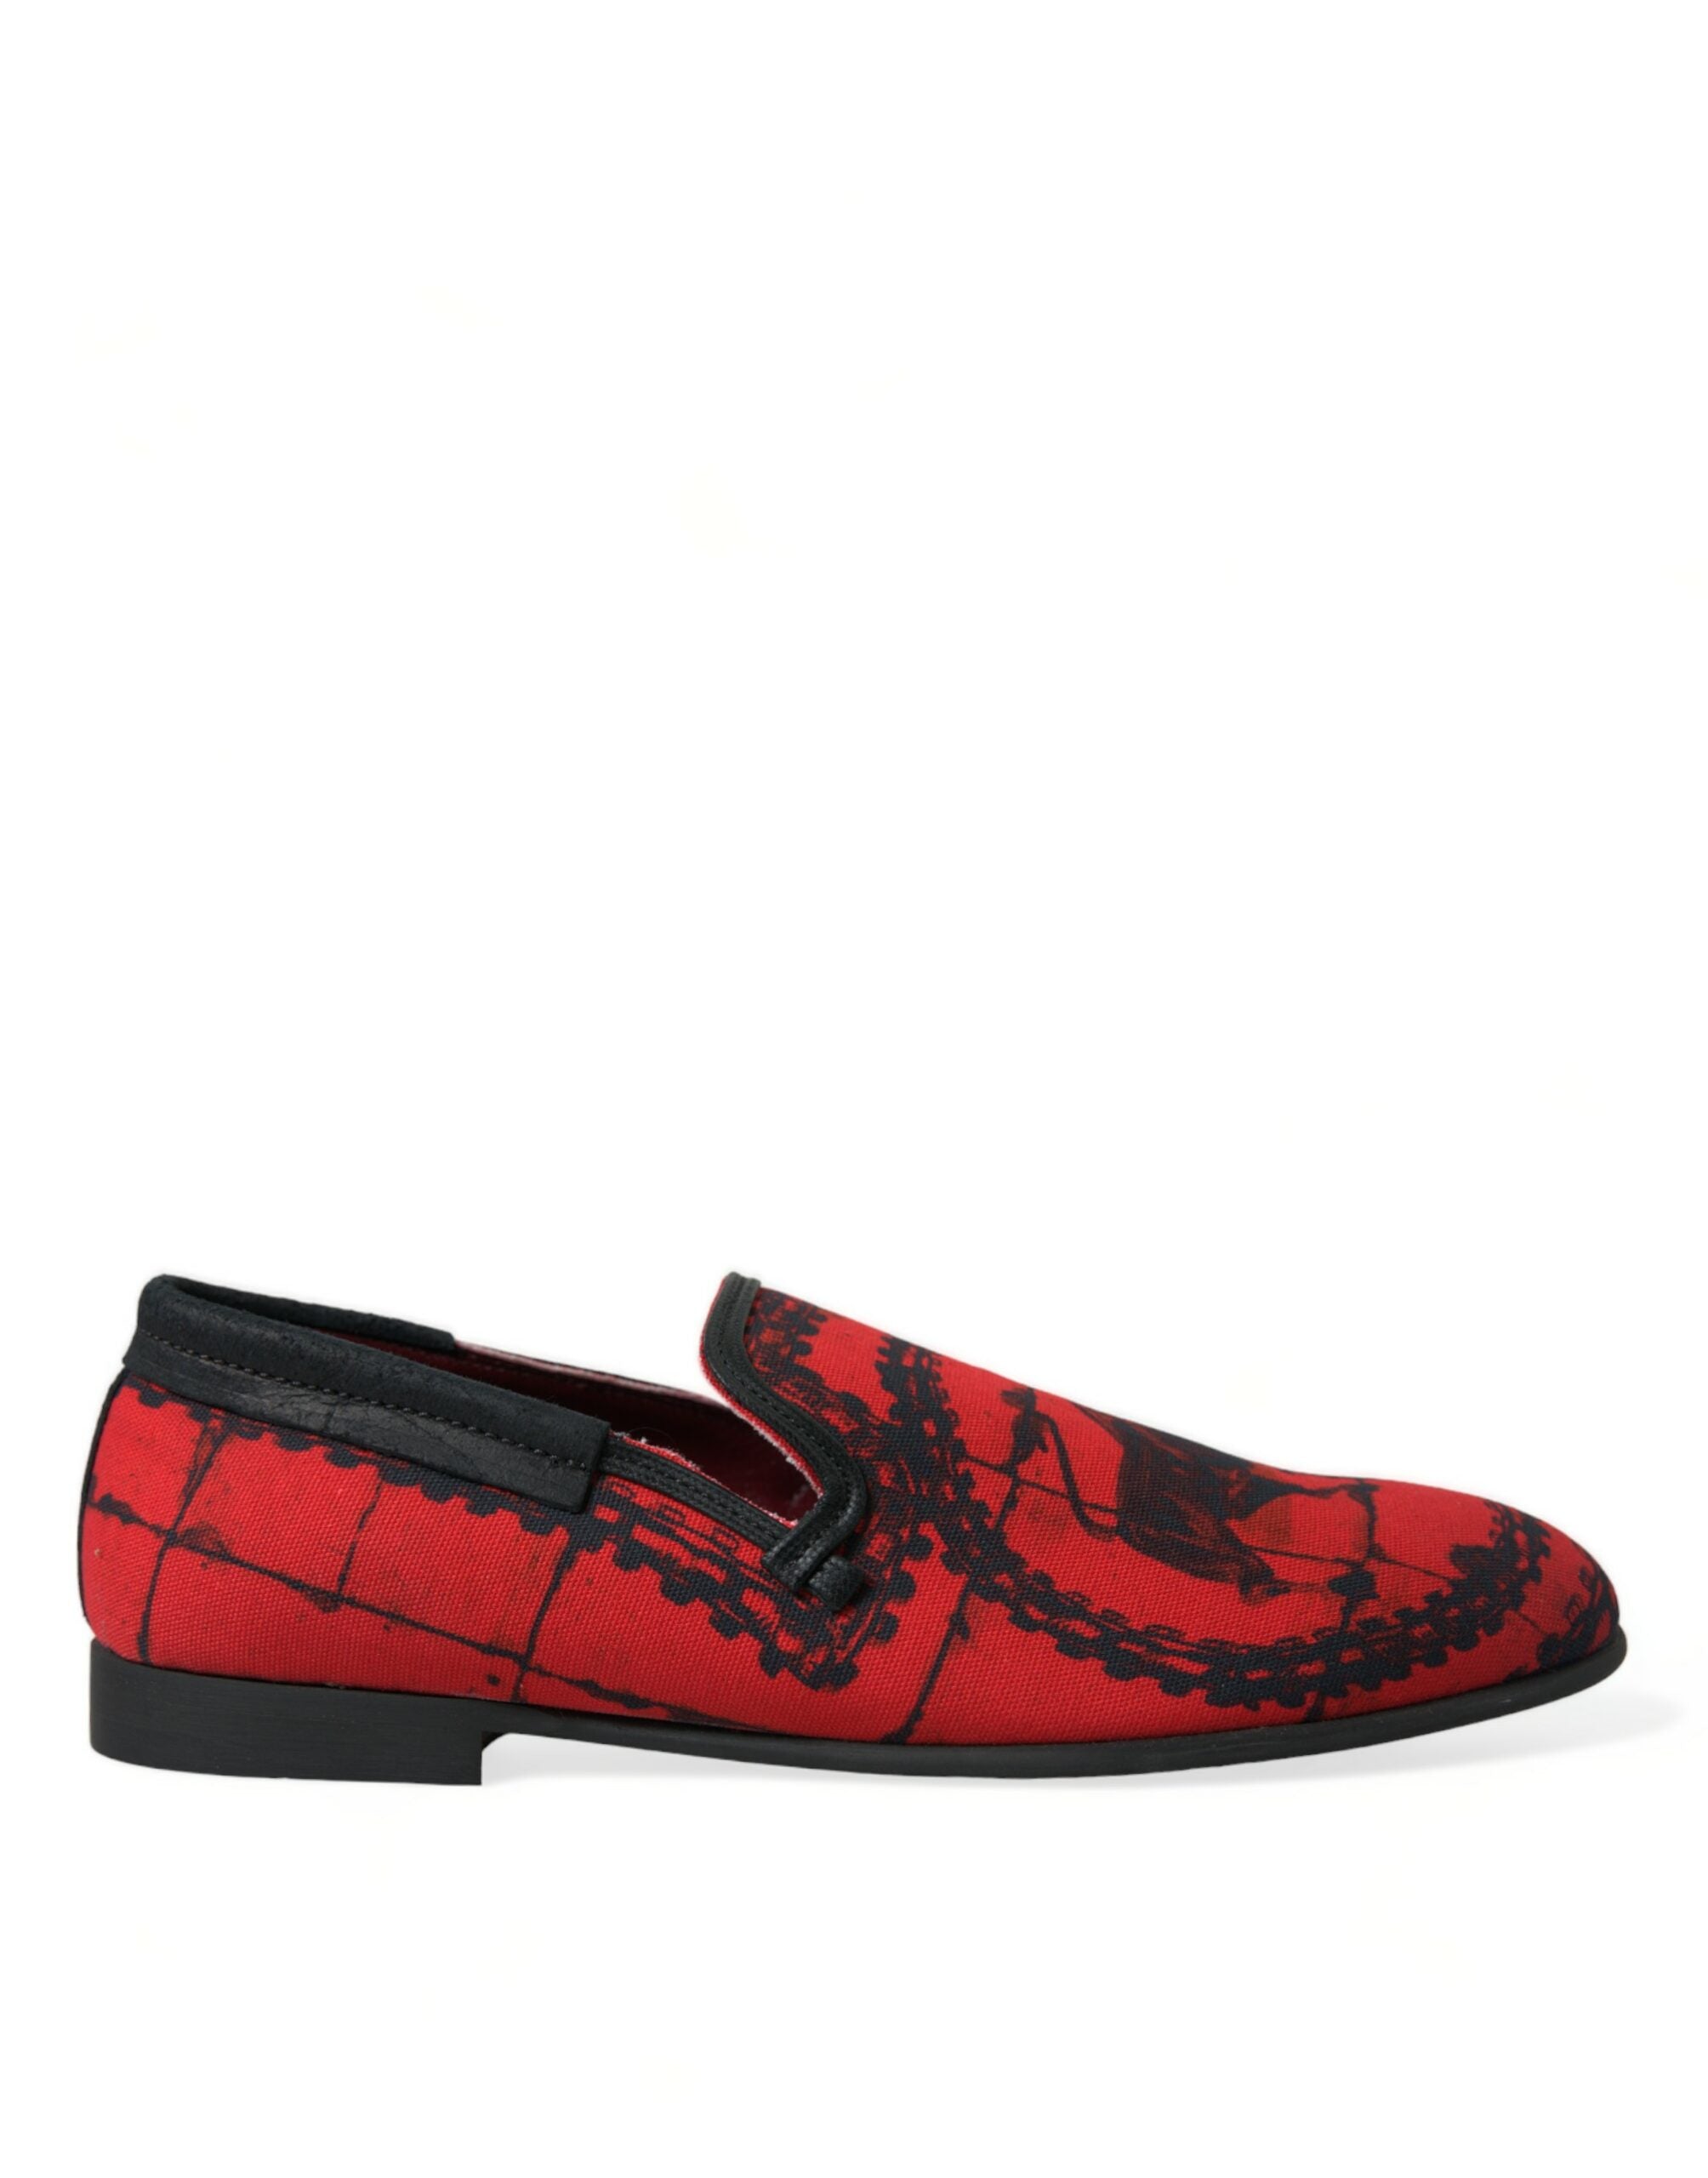 Shop Dolce & Gabbana Red Black Torero Loafers Slippers Men Shoes